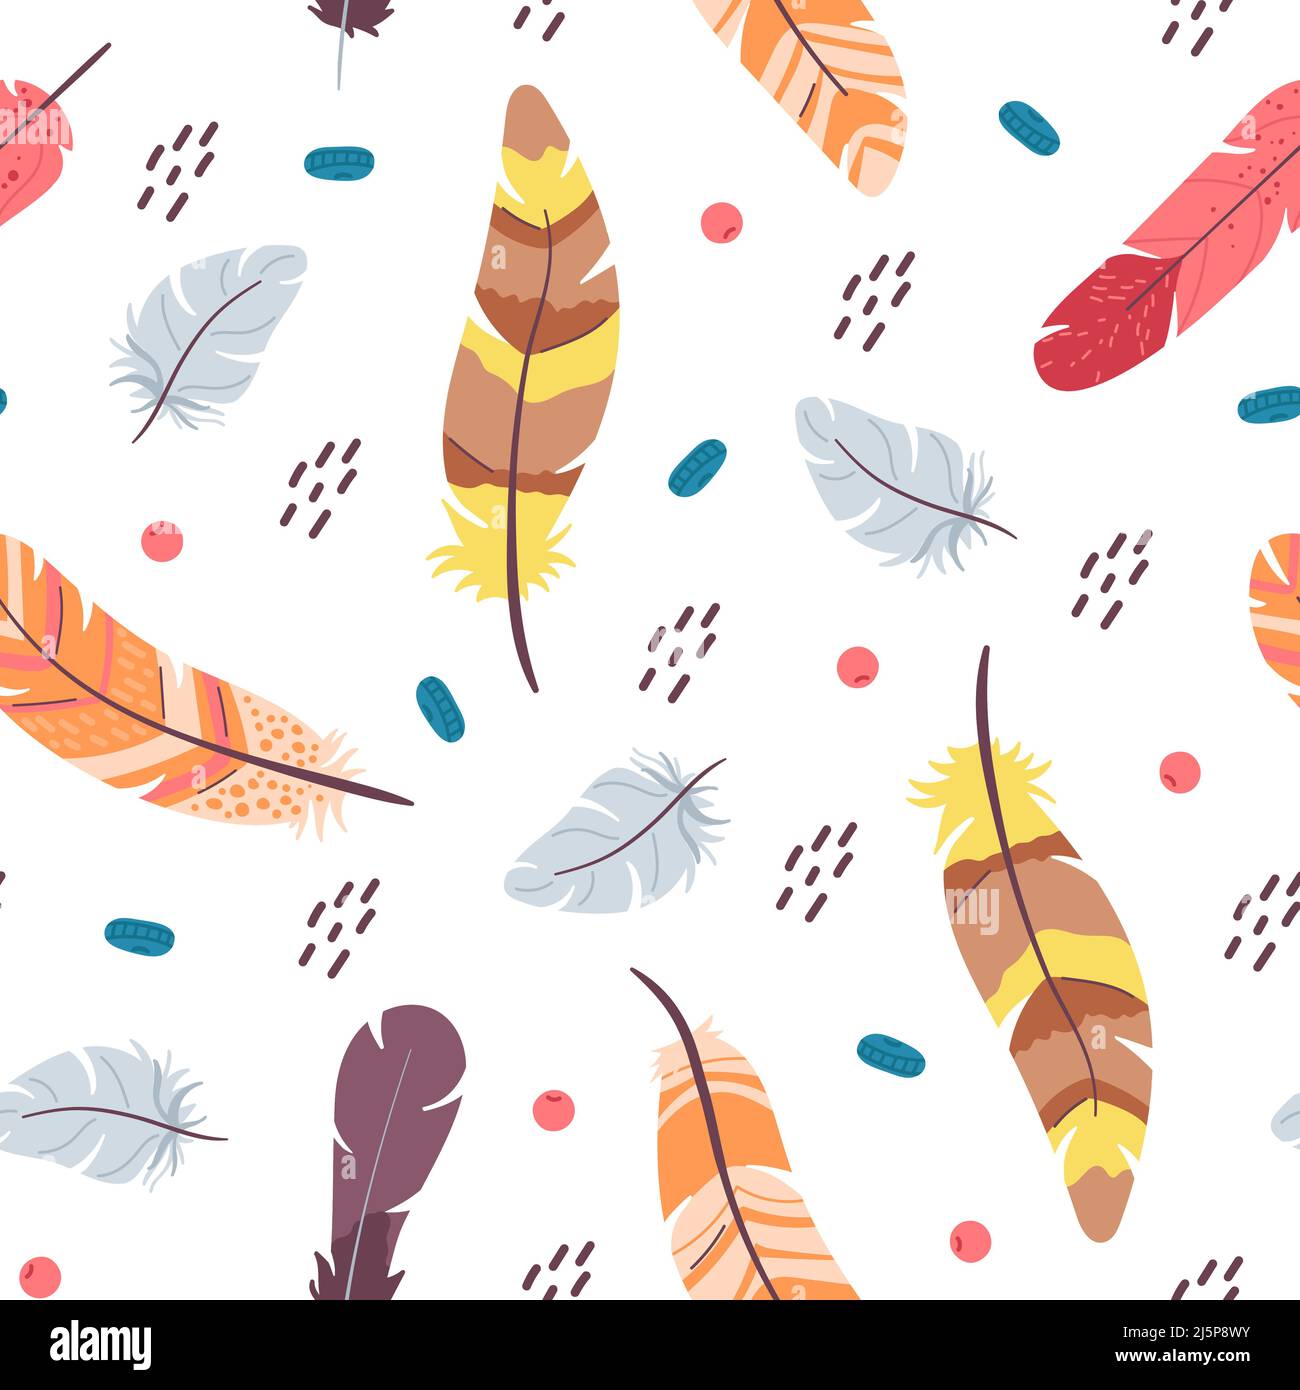 Feather seamless pattern. Color feathers print, pastel rustic decorative ornament. Bohemian tribal background. Cute boho style scandinavian decent Stock Vector